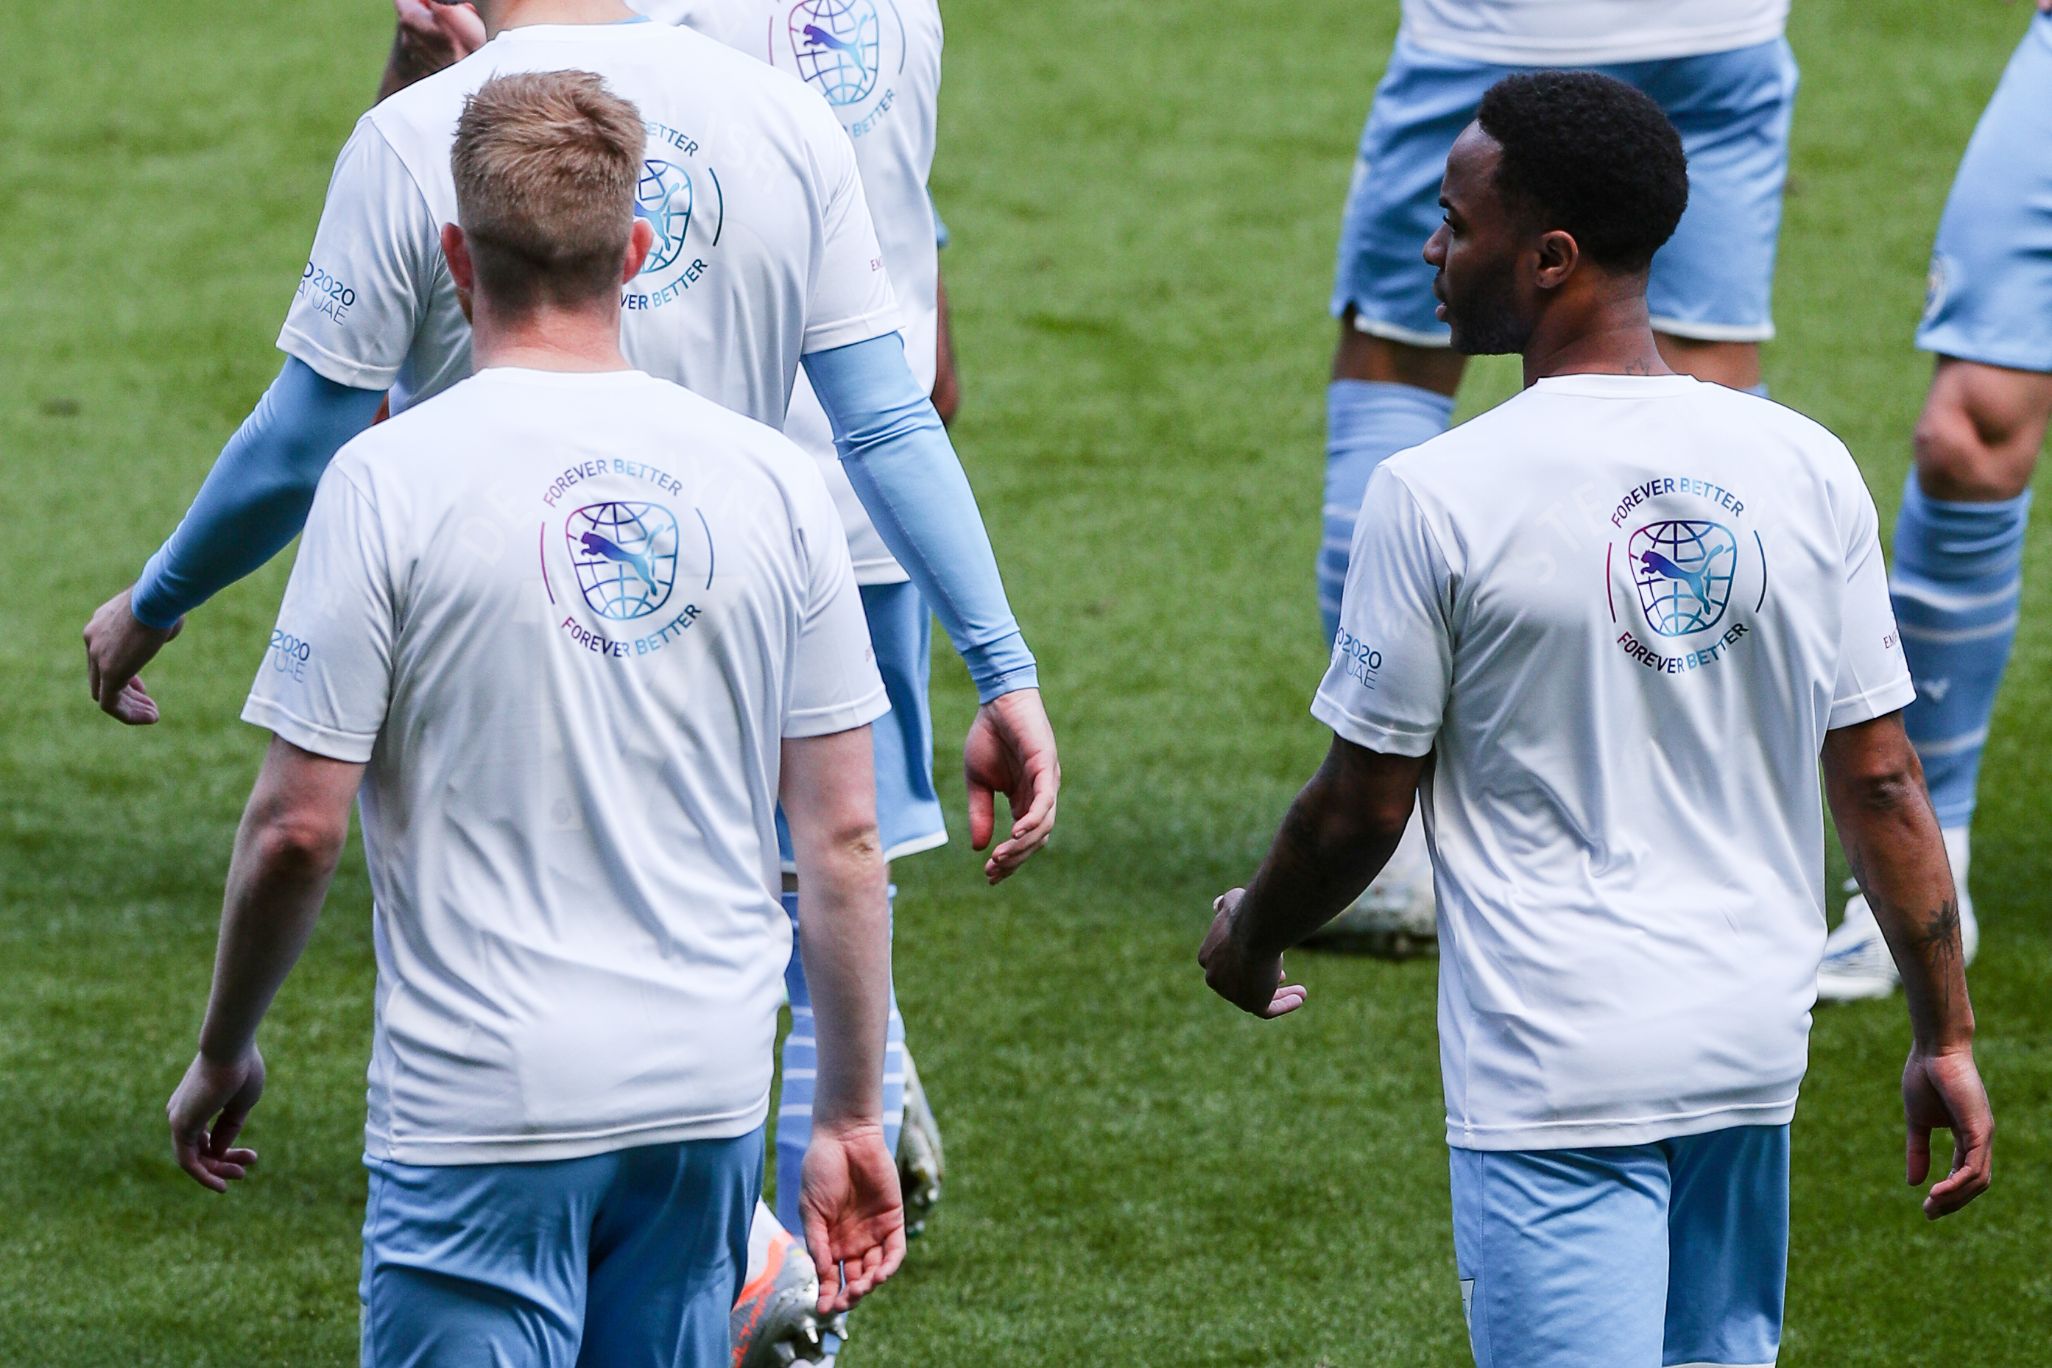 RE:JERSEY: Manchester City players wear recycled PUMA jerseys for warm-up